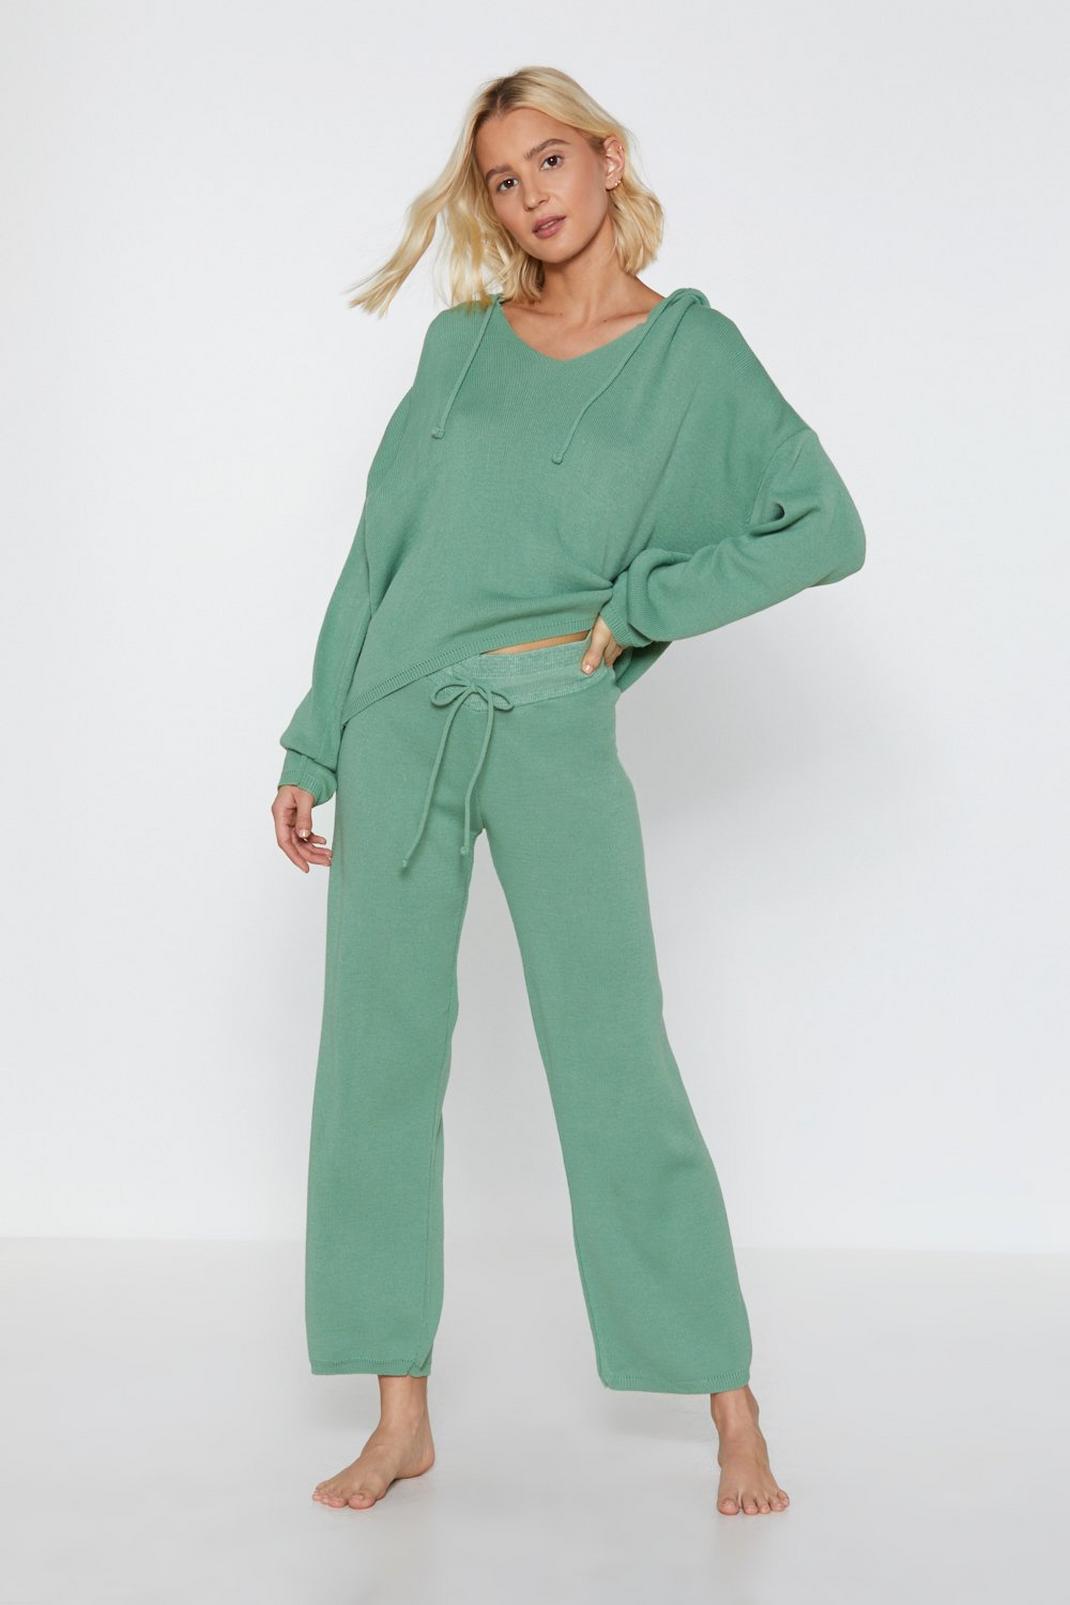 By Your Side Sweater and Wide-Leg Pants Set